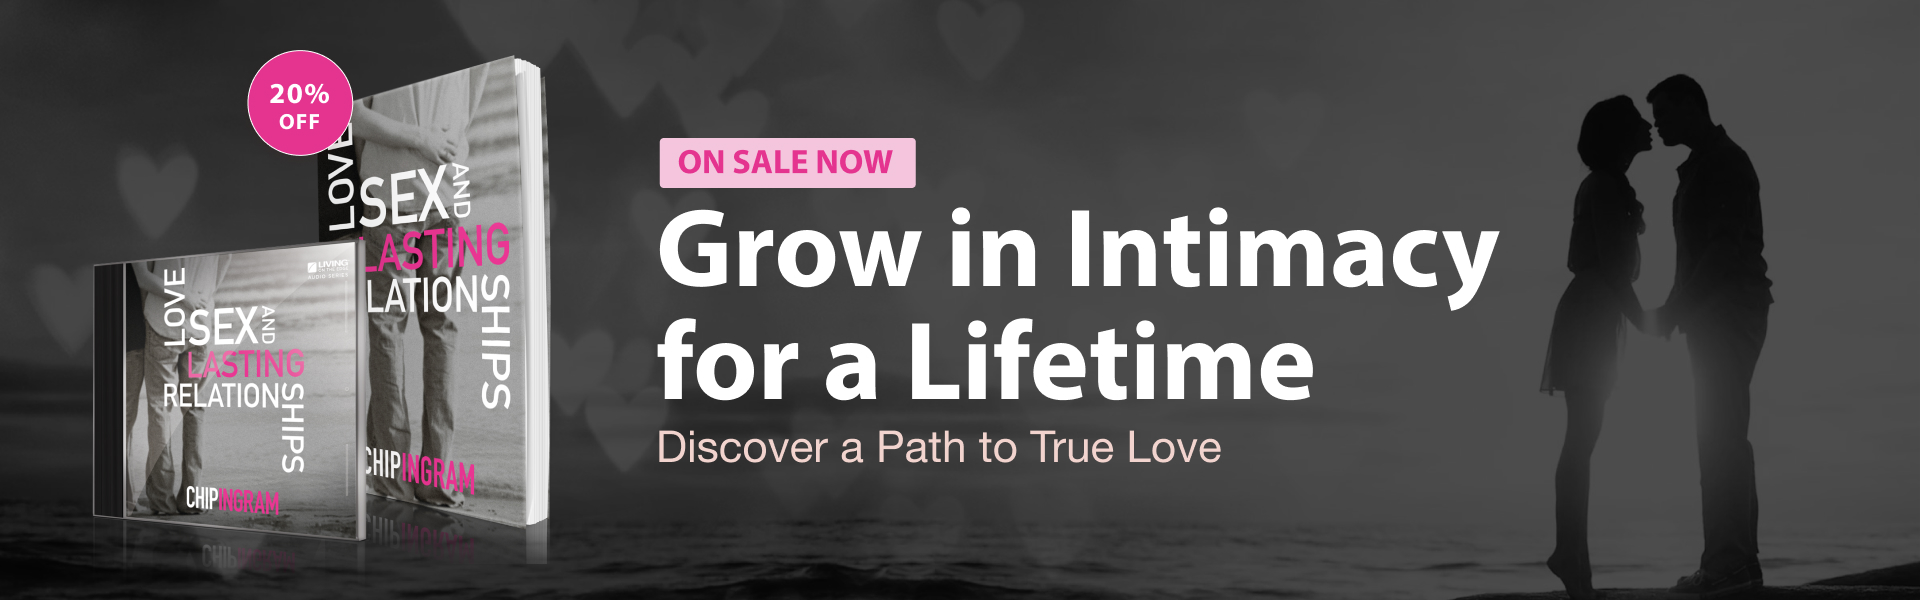 Love Sex and Lasting Relationships 20% Off Resources Limited Time Offer - 1920x600 jpeg